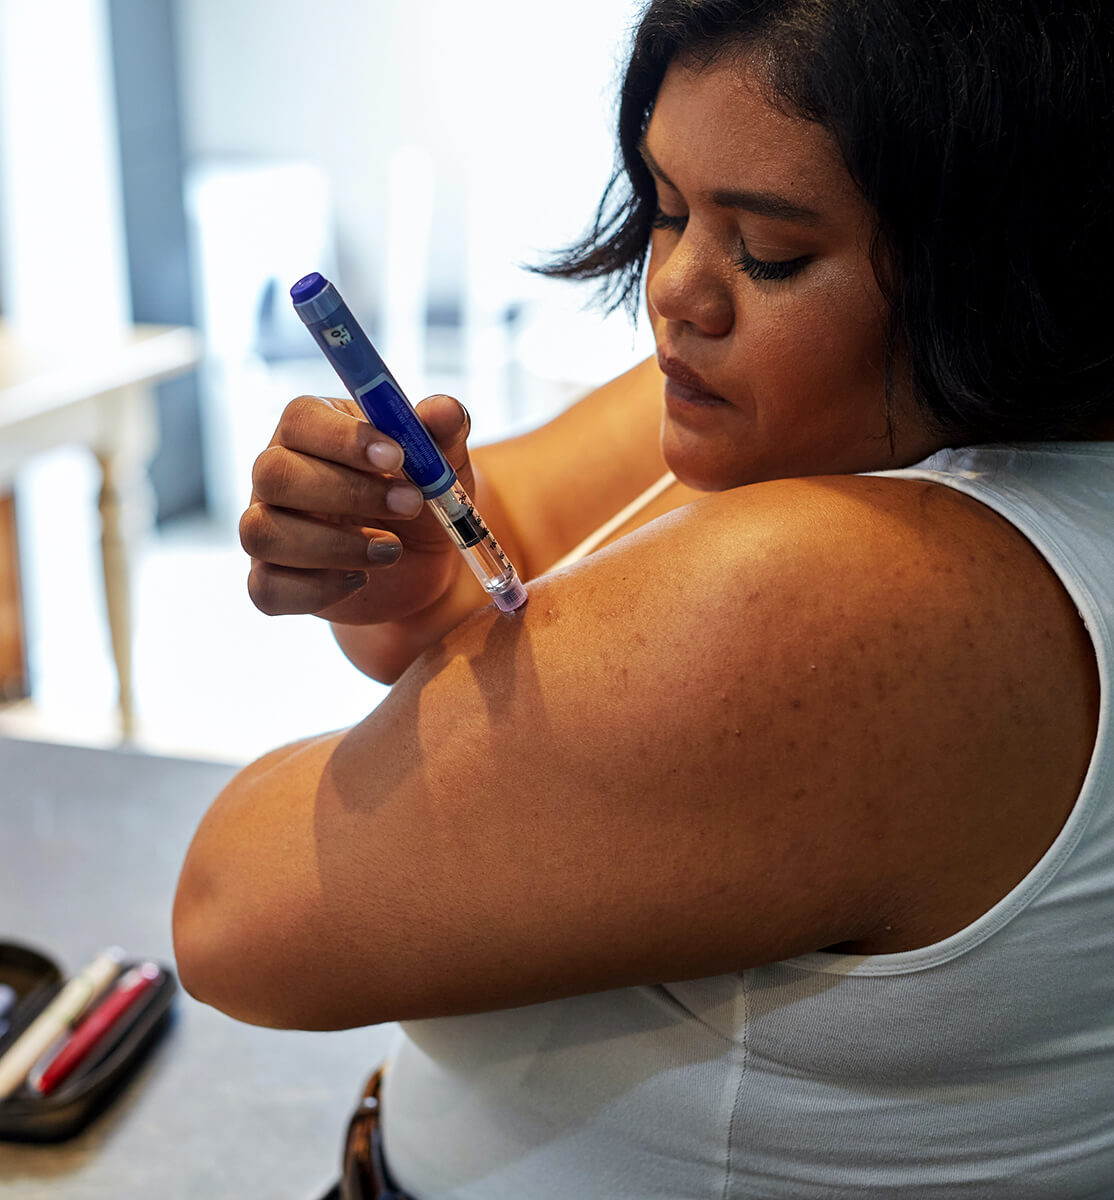 Overweight woman injecting herself with an insulin pen